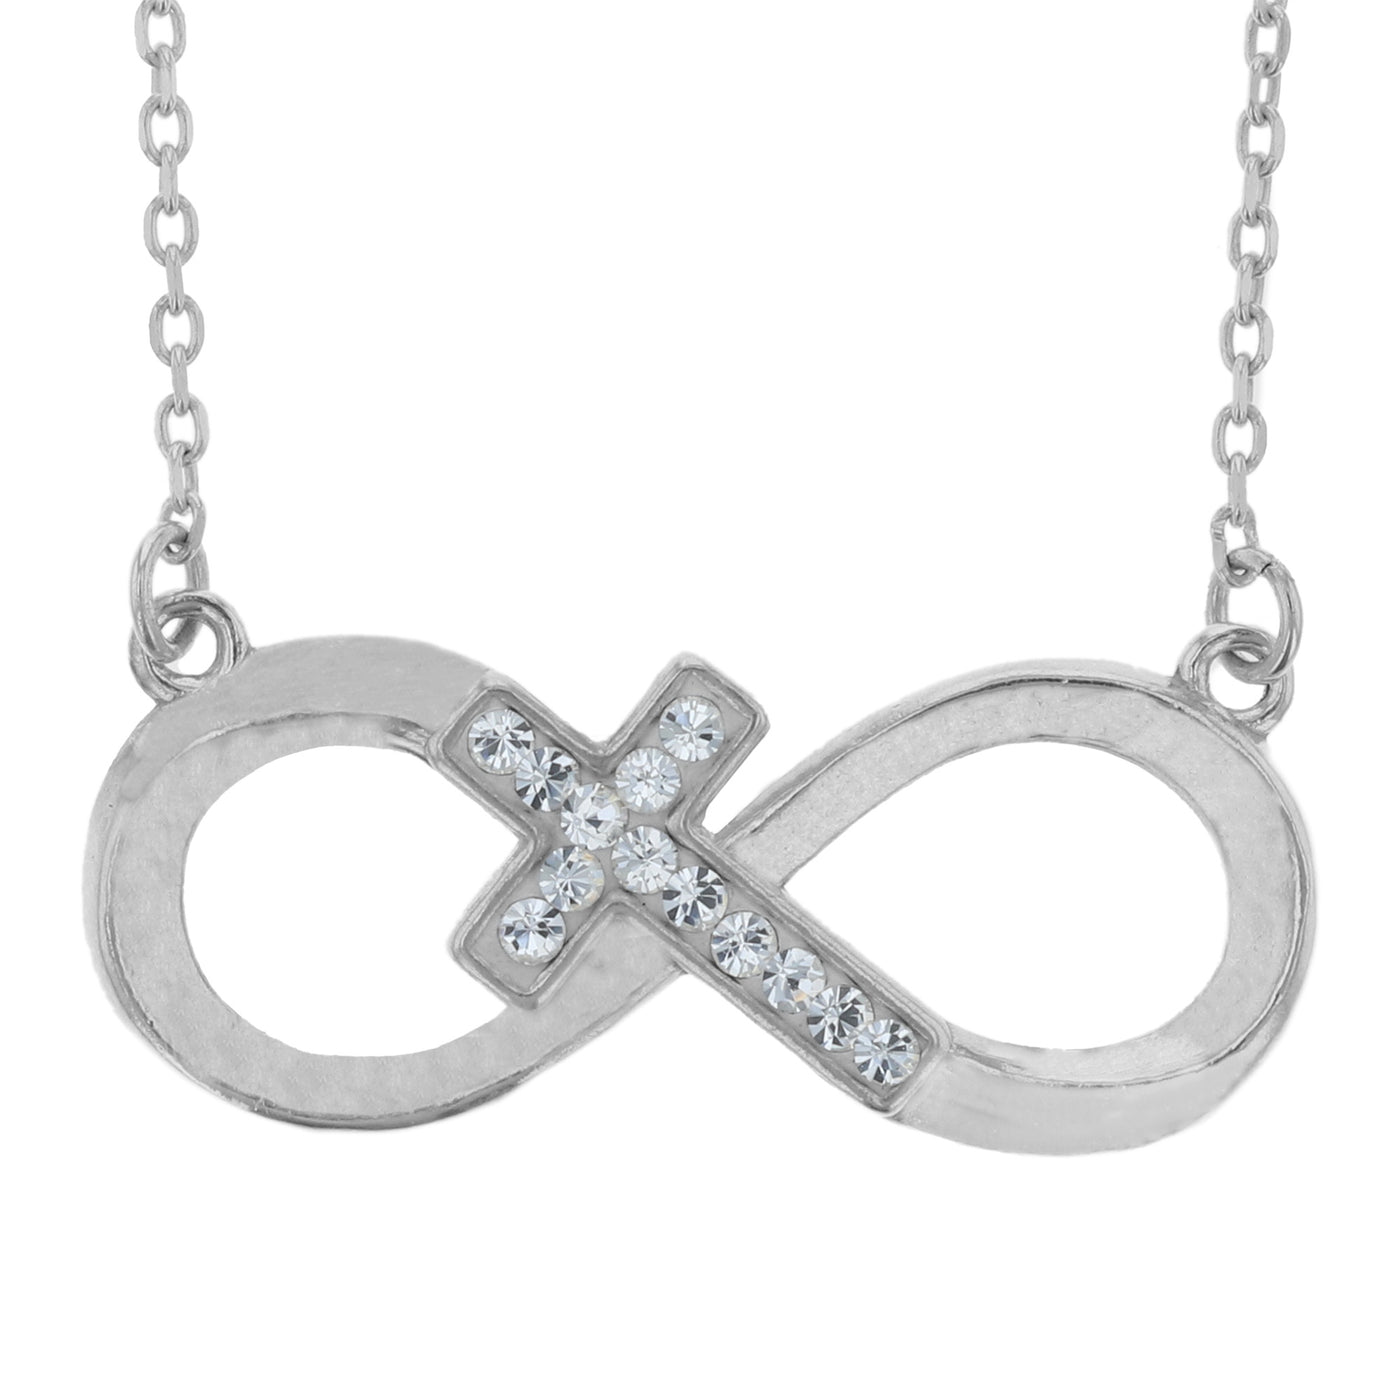 Rebecca Sloane Sterling Silver Crystal Infinity with Cross Pendant Necklace